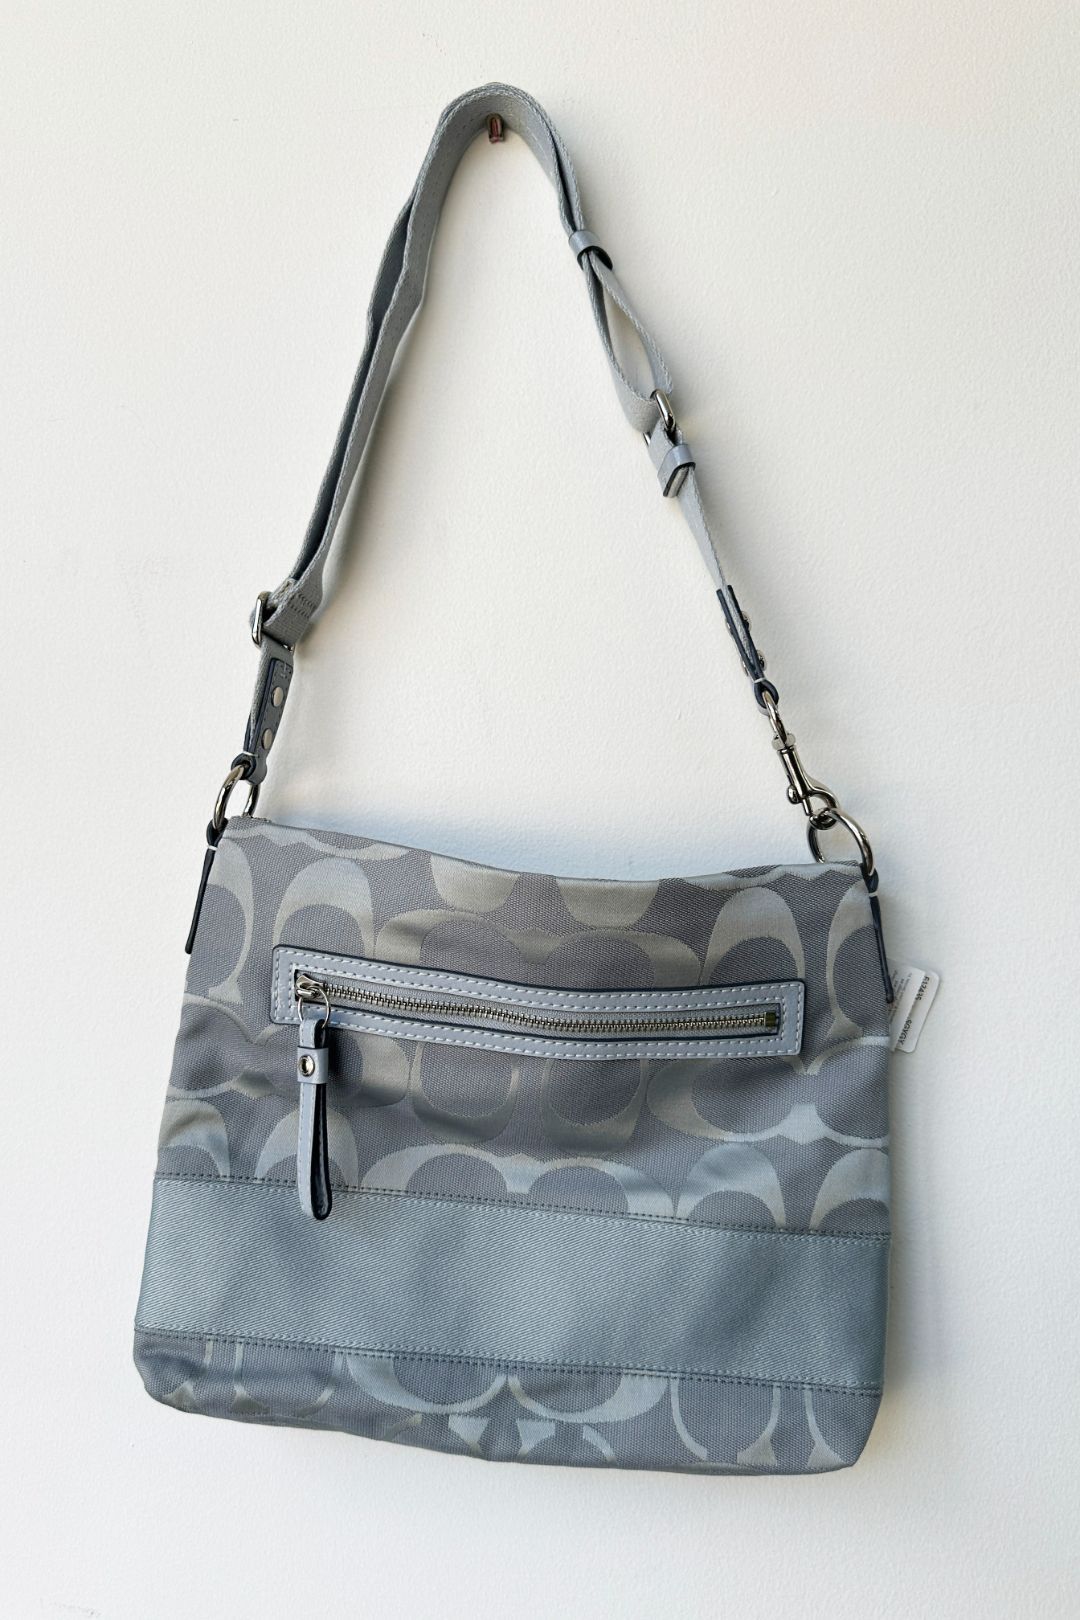 Coach Canvas Crossbody Bag in Silver and Gray